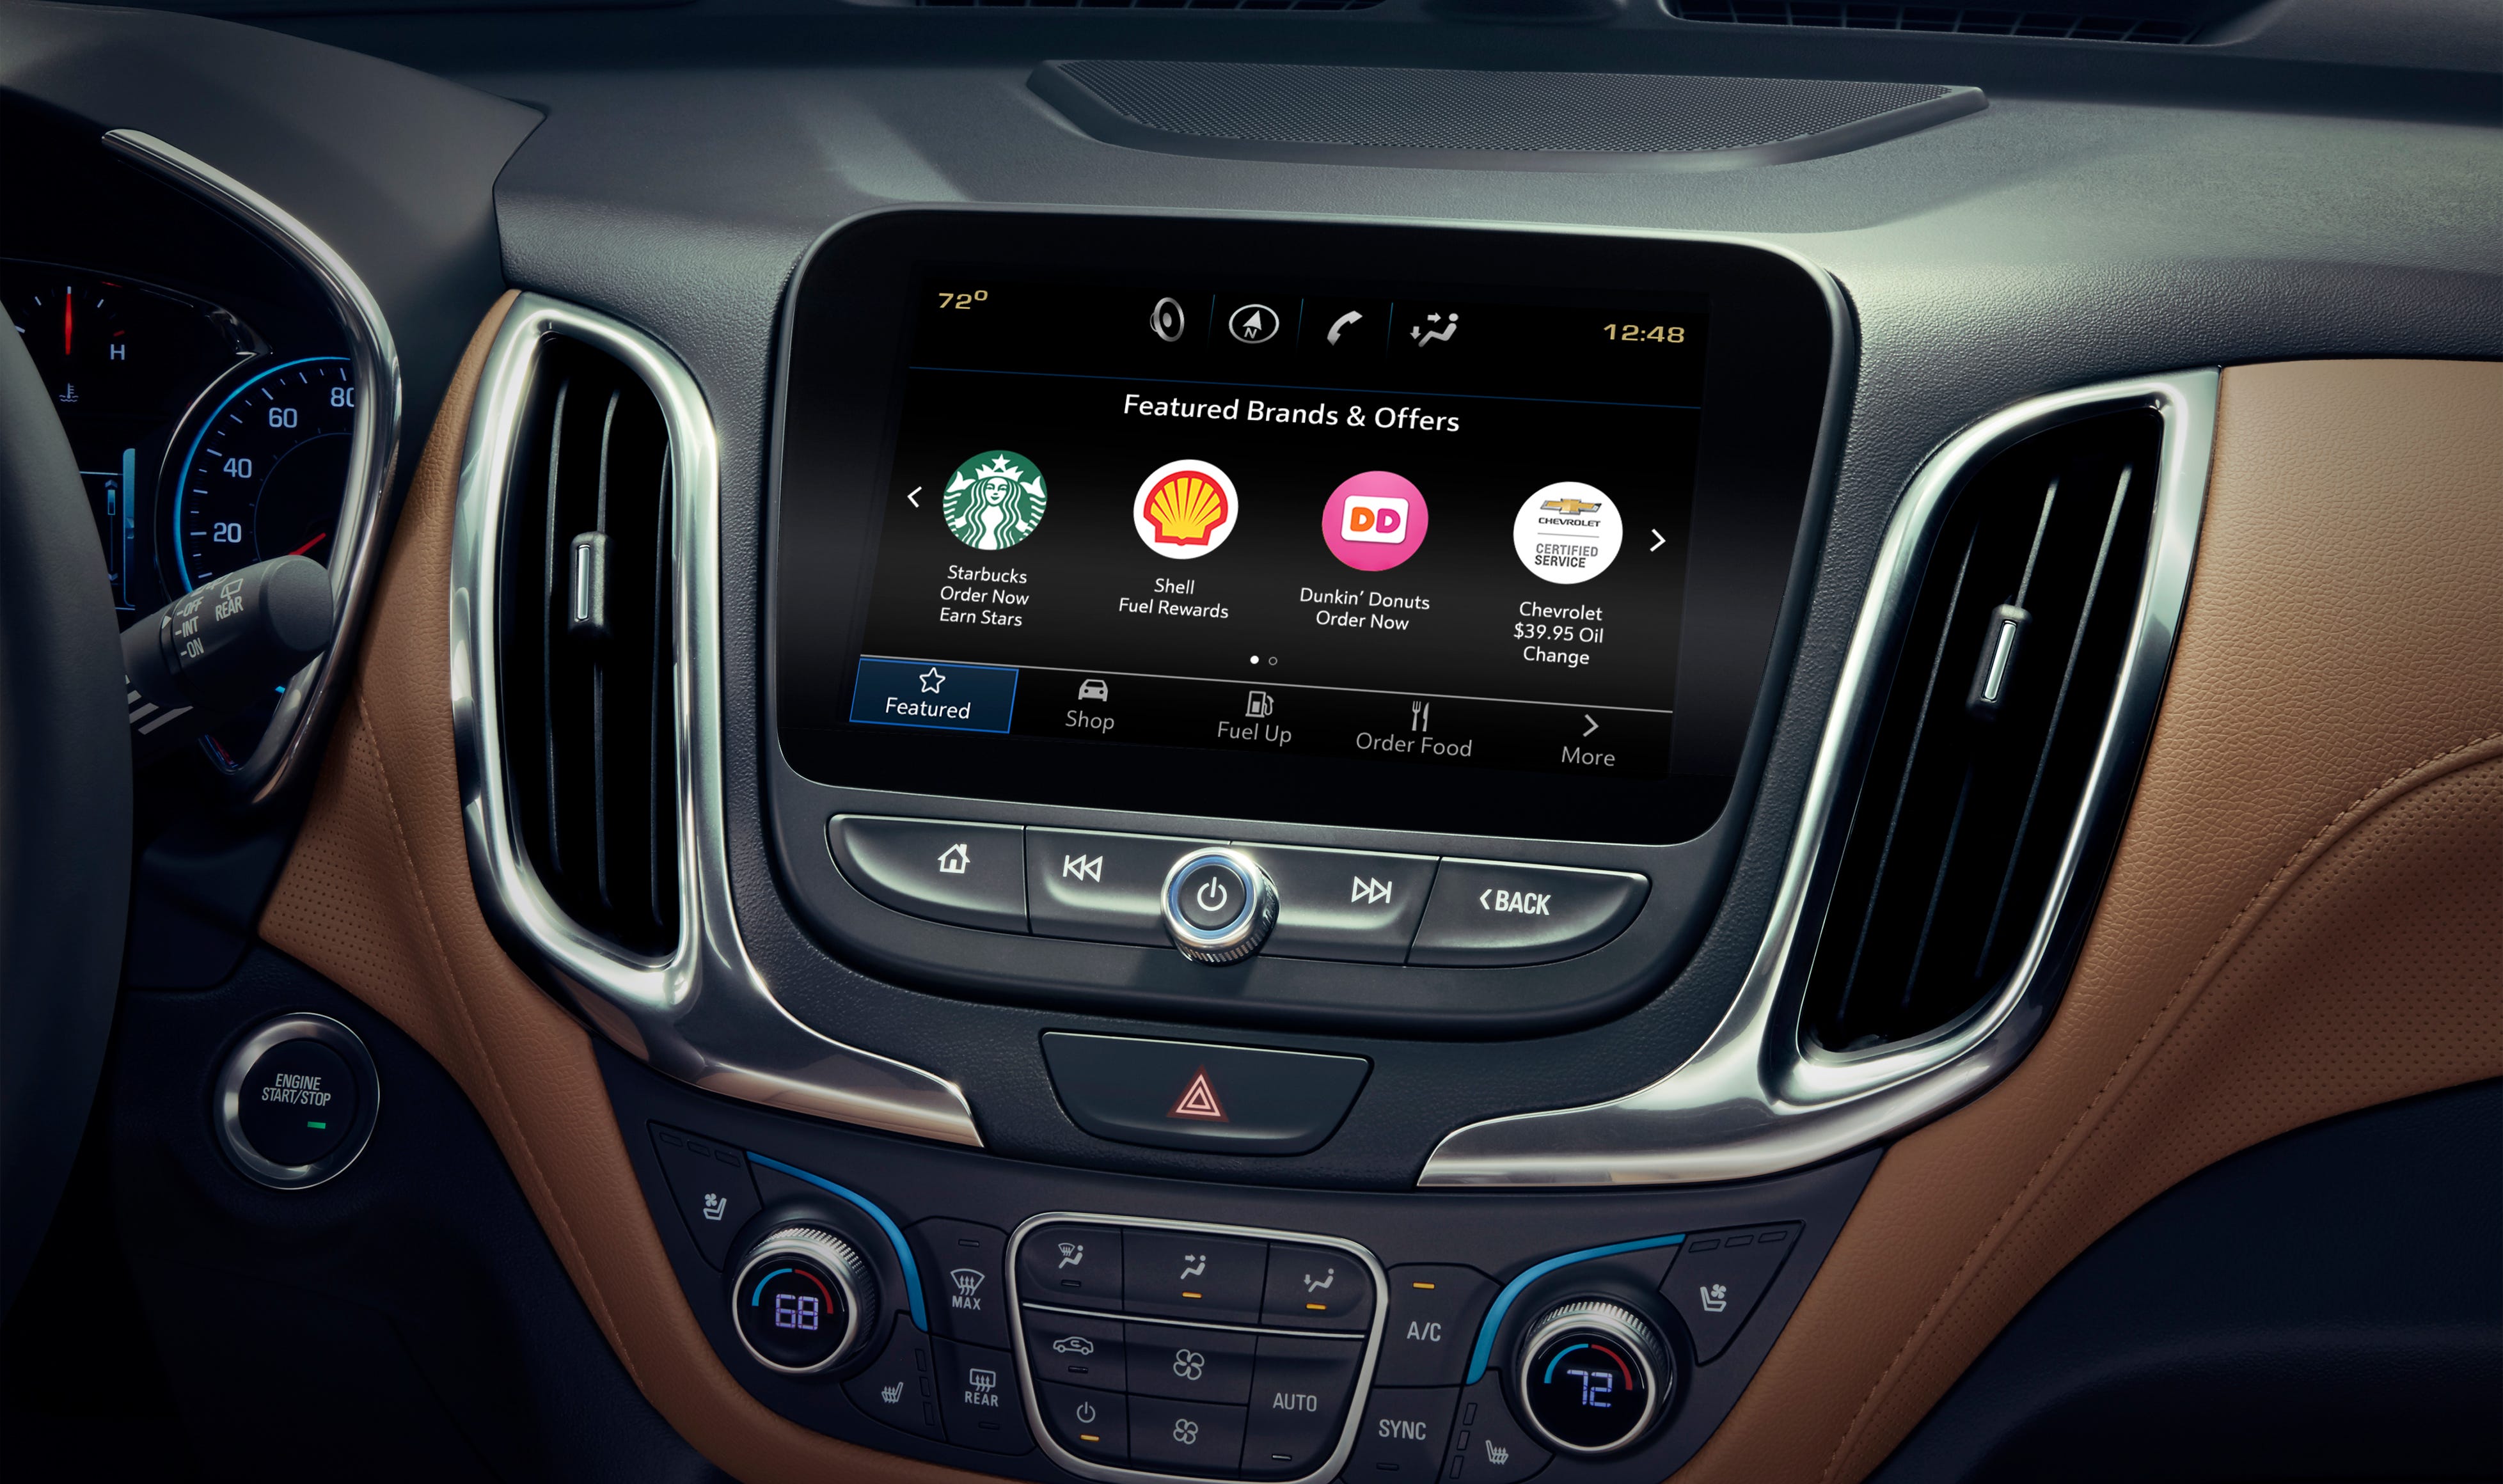 GM wants you to shop from your car for food, gasoline and hotels